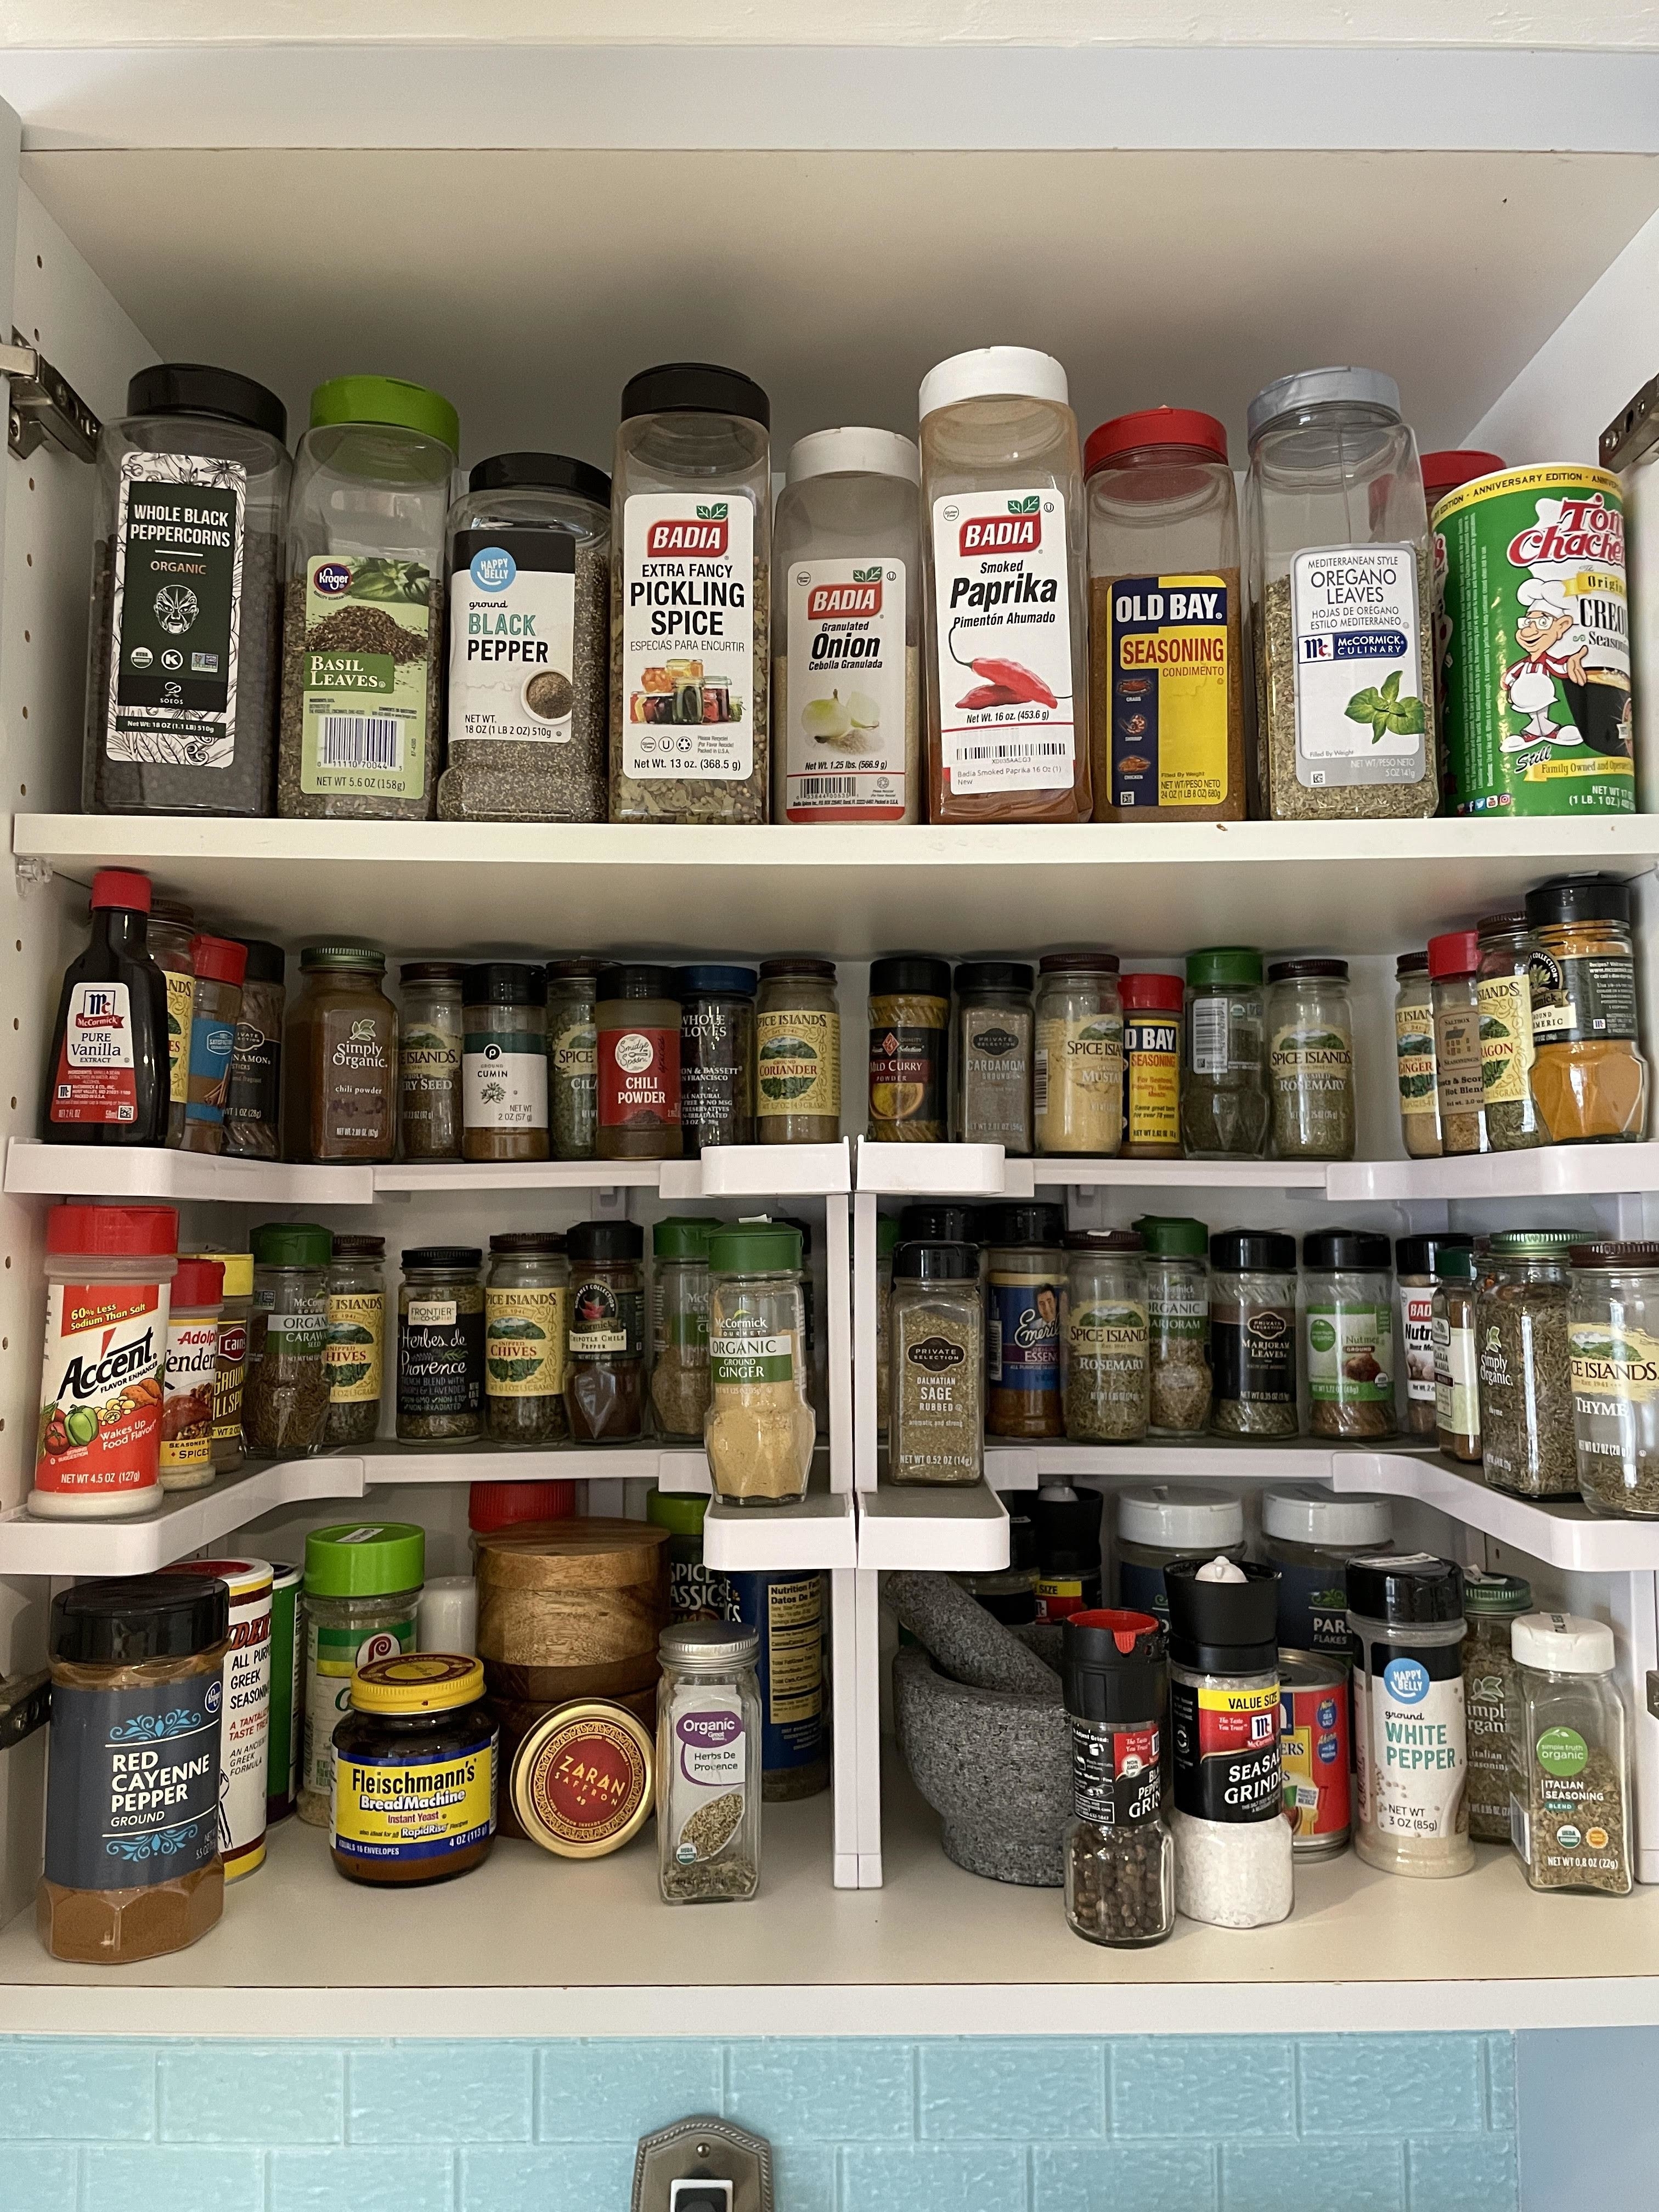 A neatly organized spice rack with various labeled seasoning containers